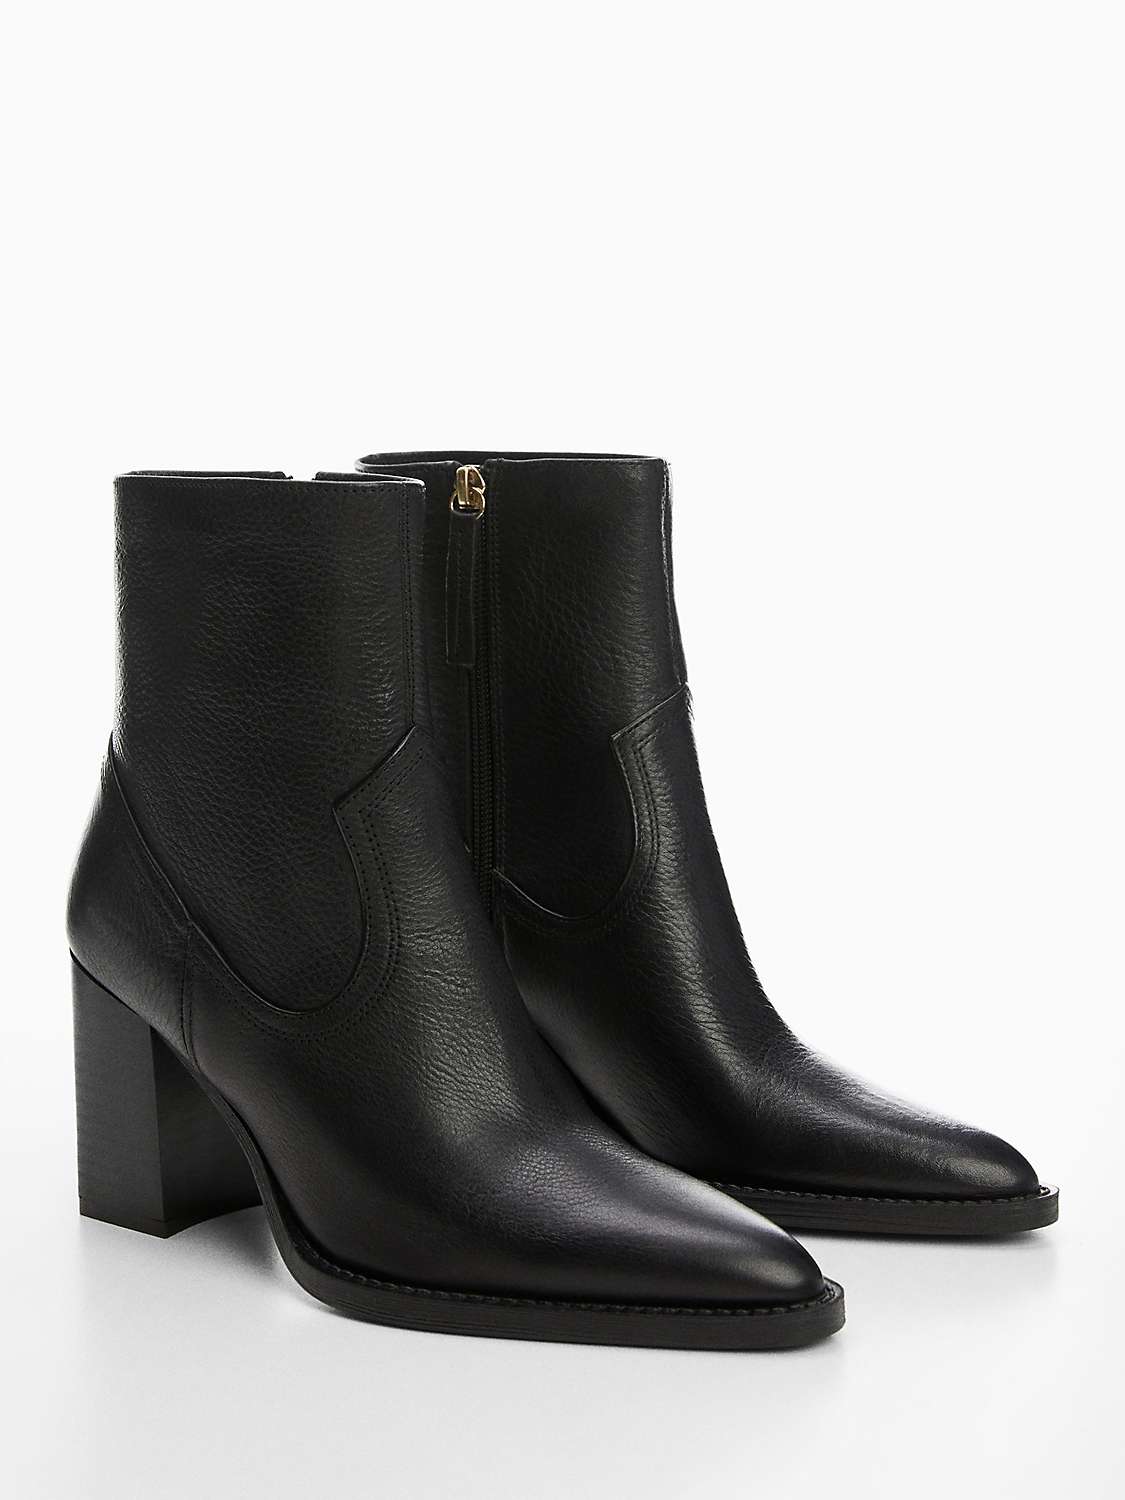 Buy Mango Laly Leather Ankle Boots, Black Online at johnlewis.com